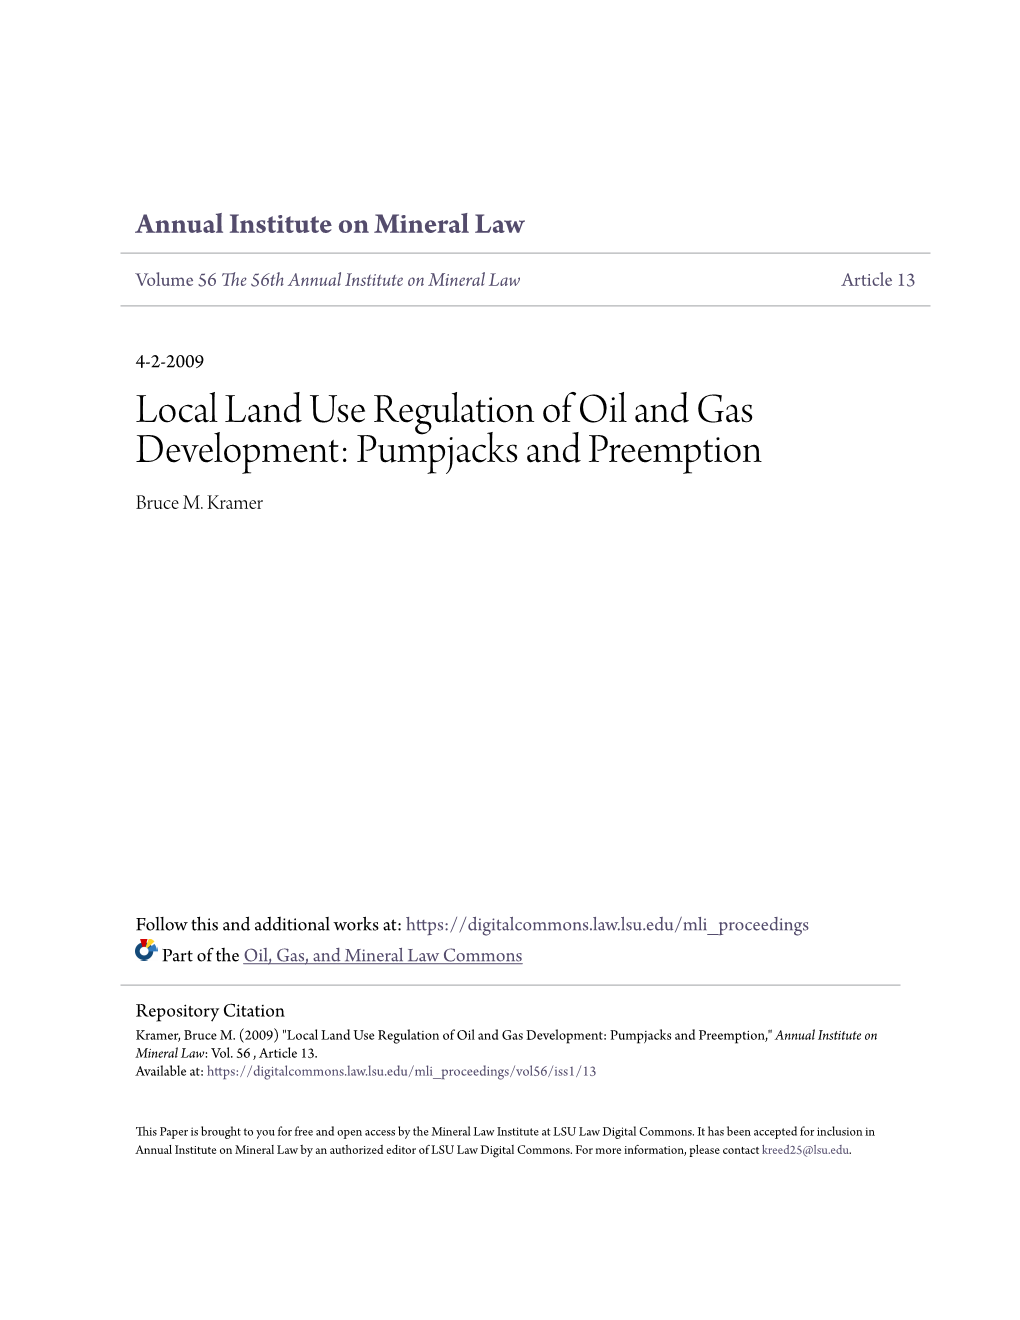 Local Land Use Regulation of Oil and Gas Development: Pumpjacks and Preemption Bruce M